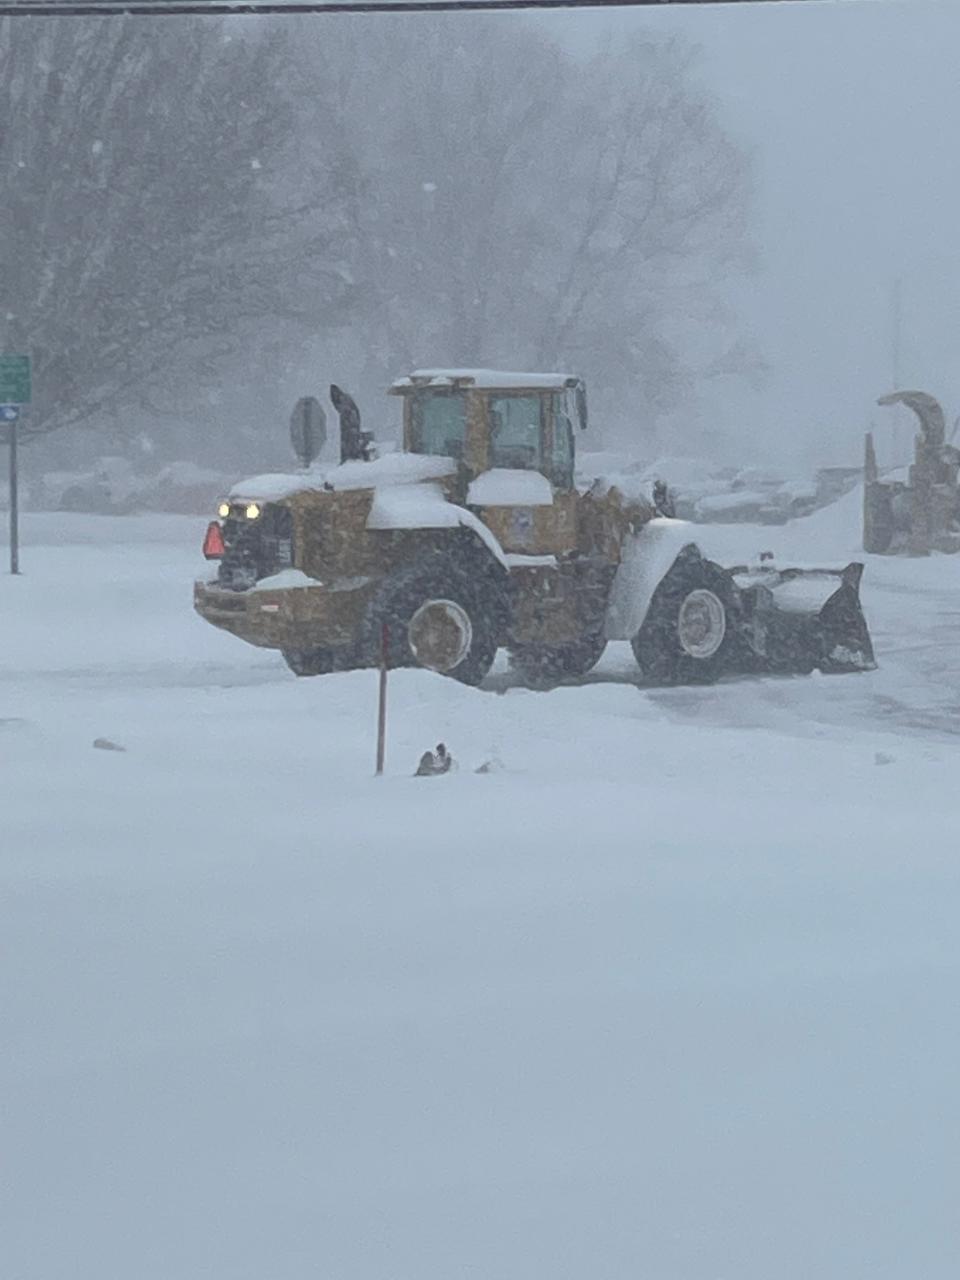 Plows and loaders clearing snow-packed roads near the state Department of Motor Vehicles office in Norwich in January 2022.